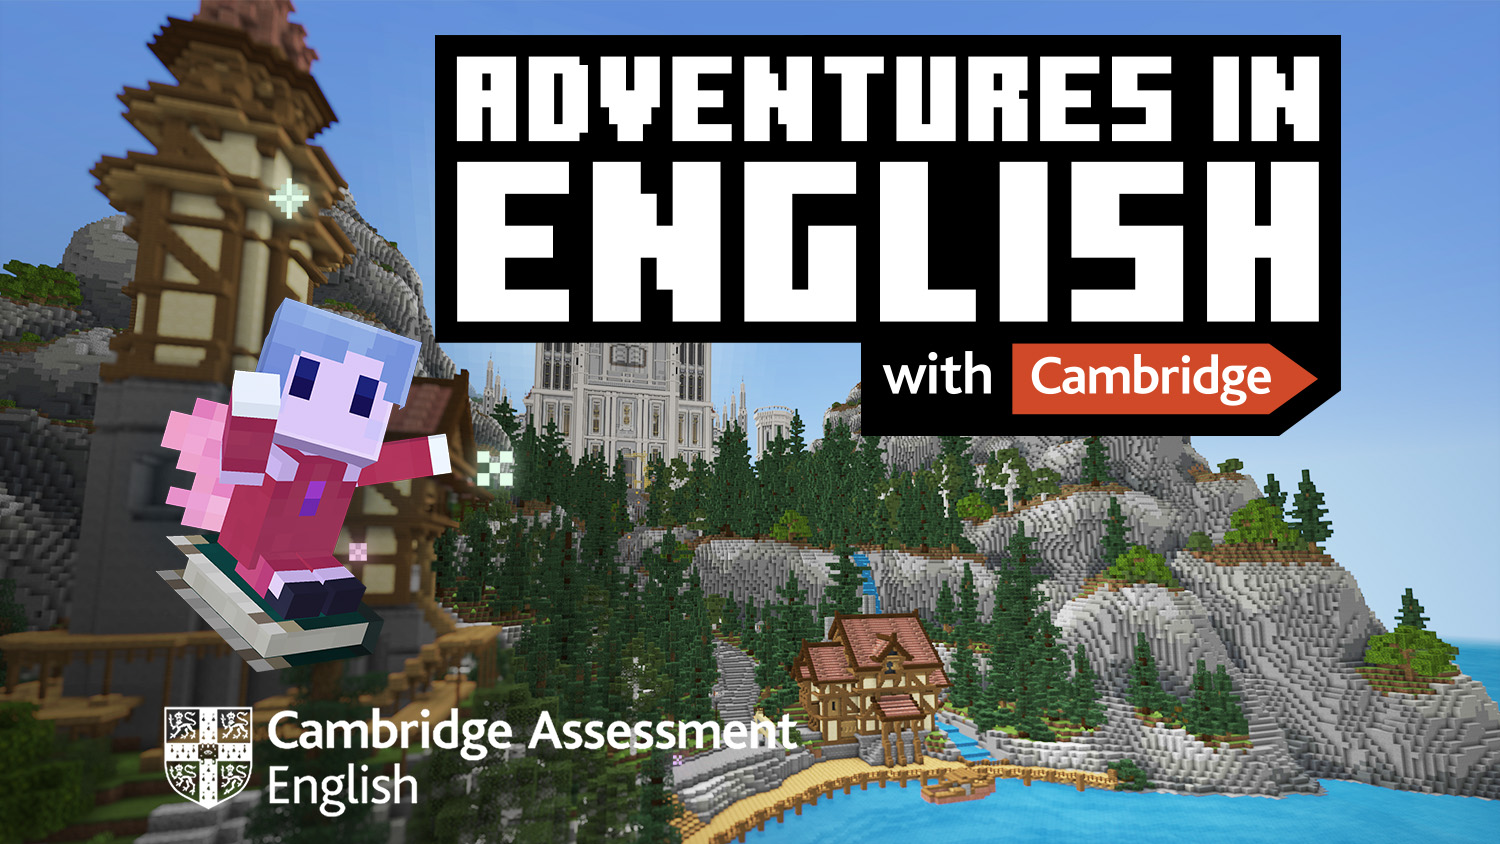 O que significa Minecraft? - English Experts